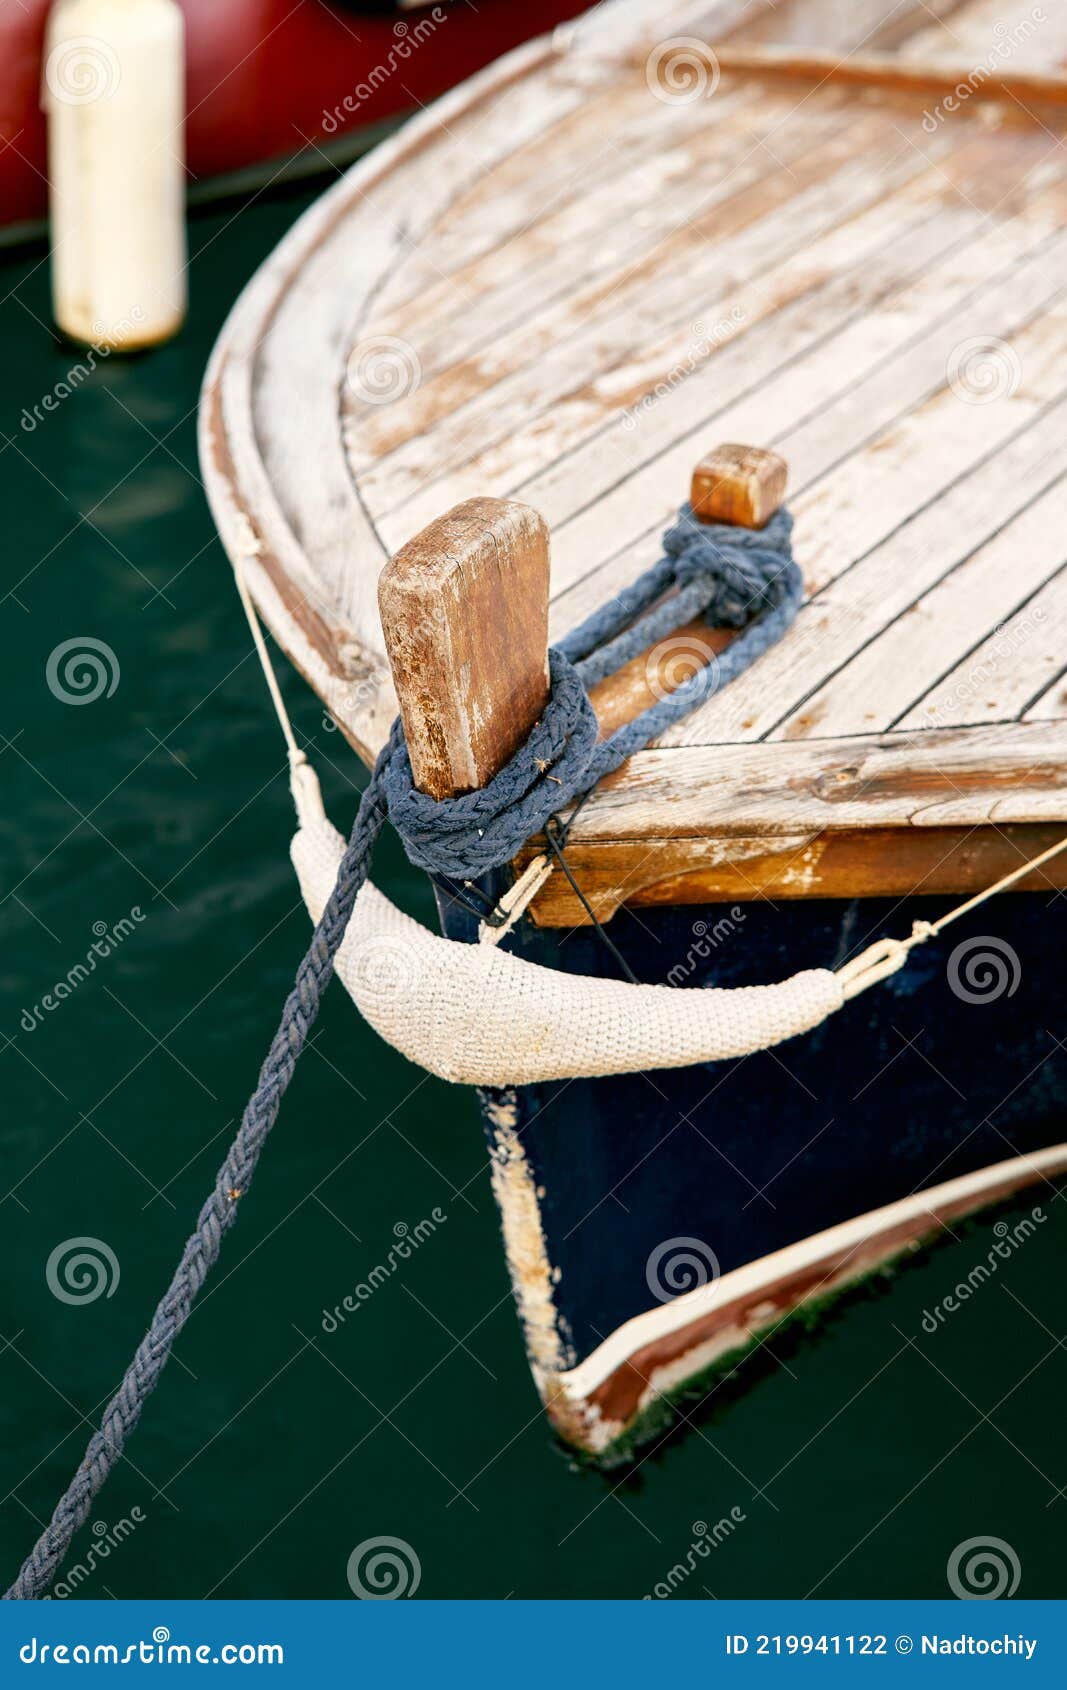 https://thumbs.dreamstime.com/z/bow-wooden-boat-anchor-rope-attached-close-up-bow-wooden-boat-anchor-rope-attached-close-up-high-quality-219941122.jpg